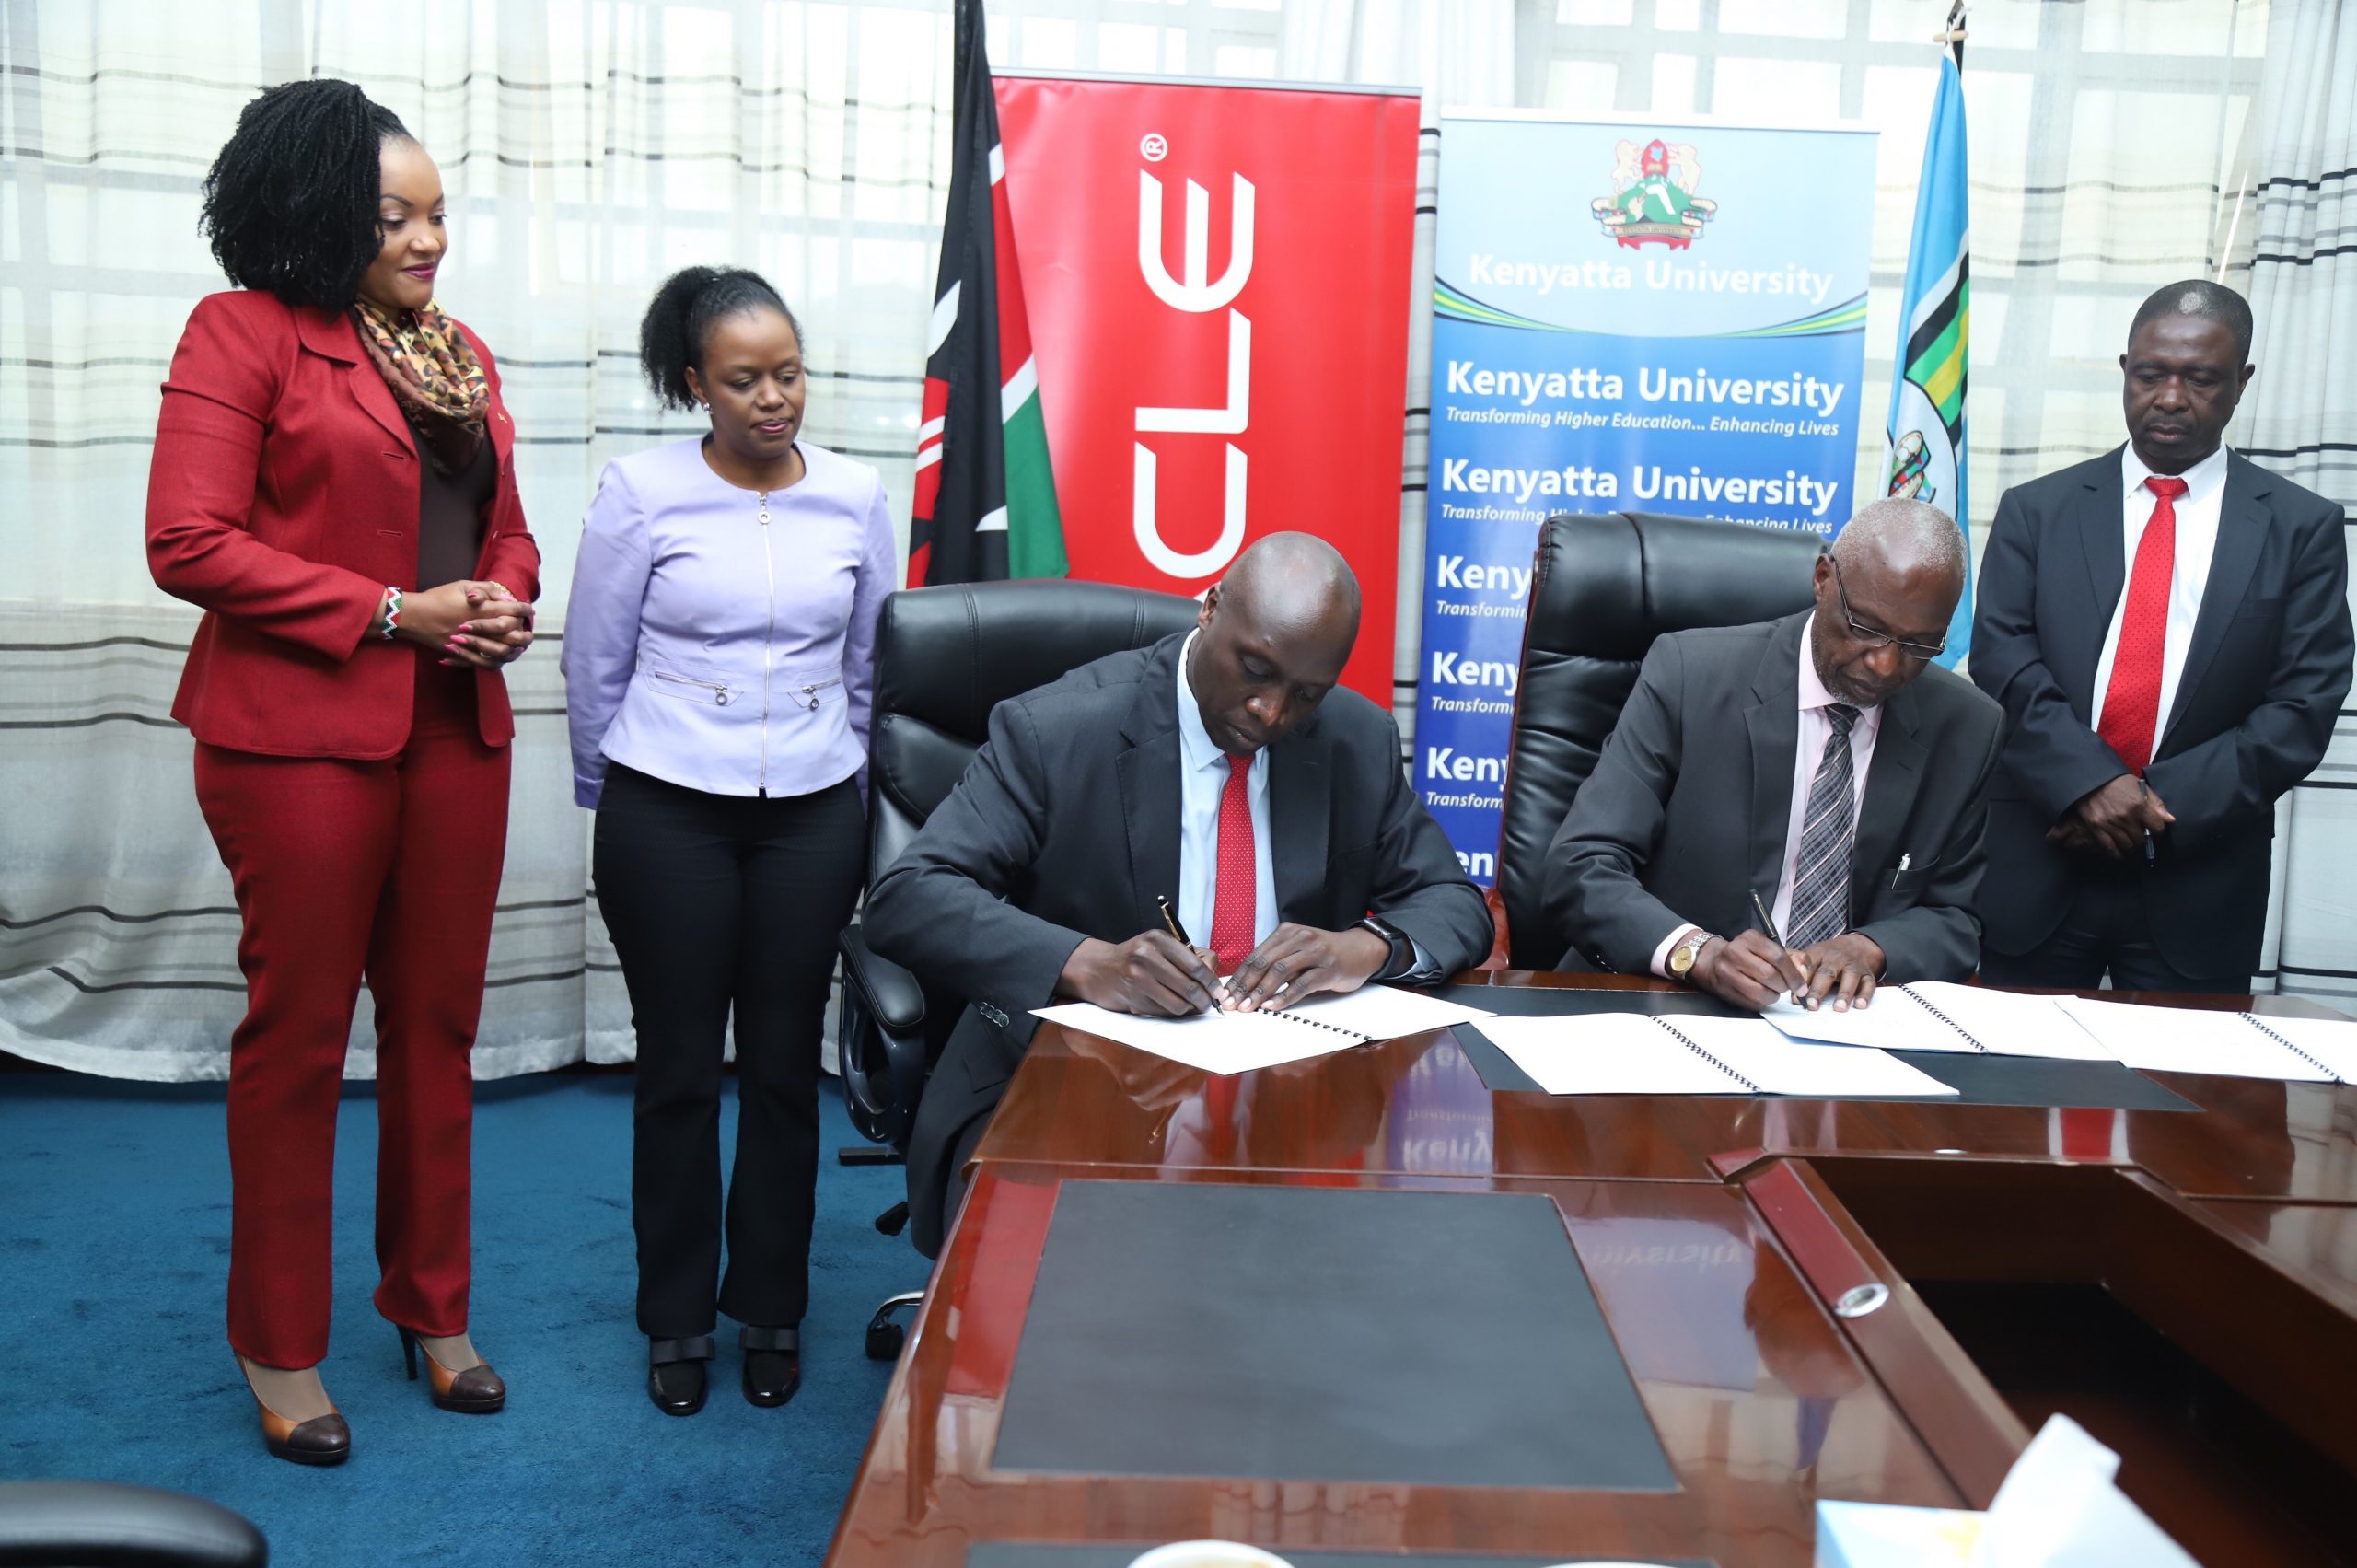 Oracle partners with KU to train 7000 students